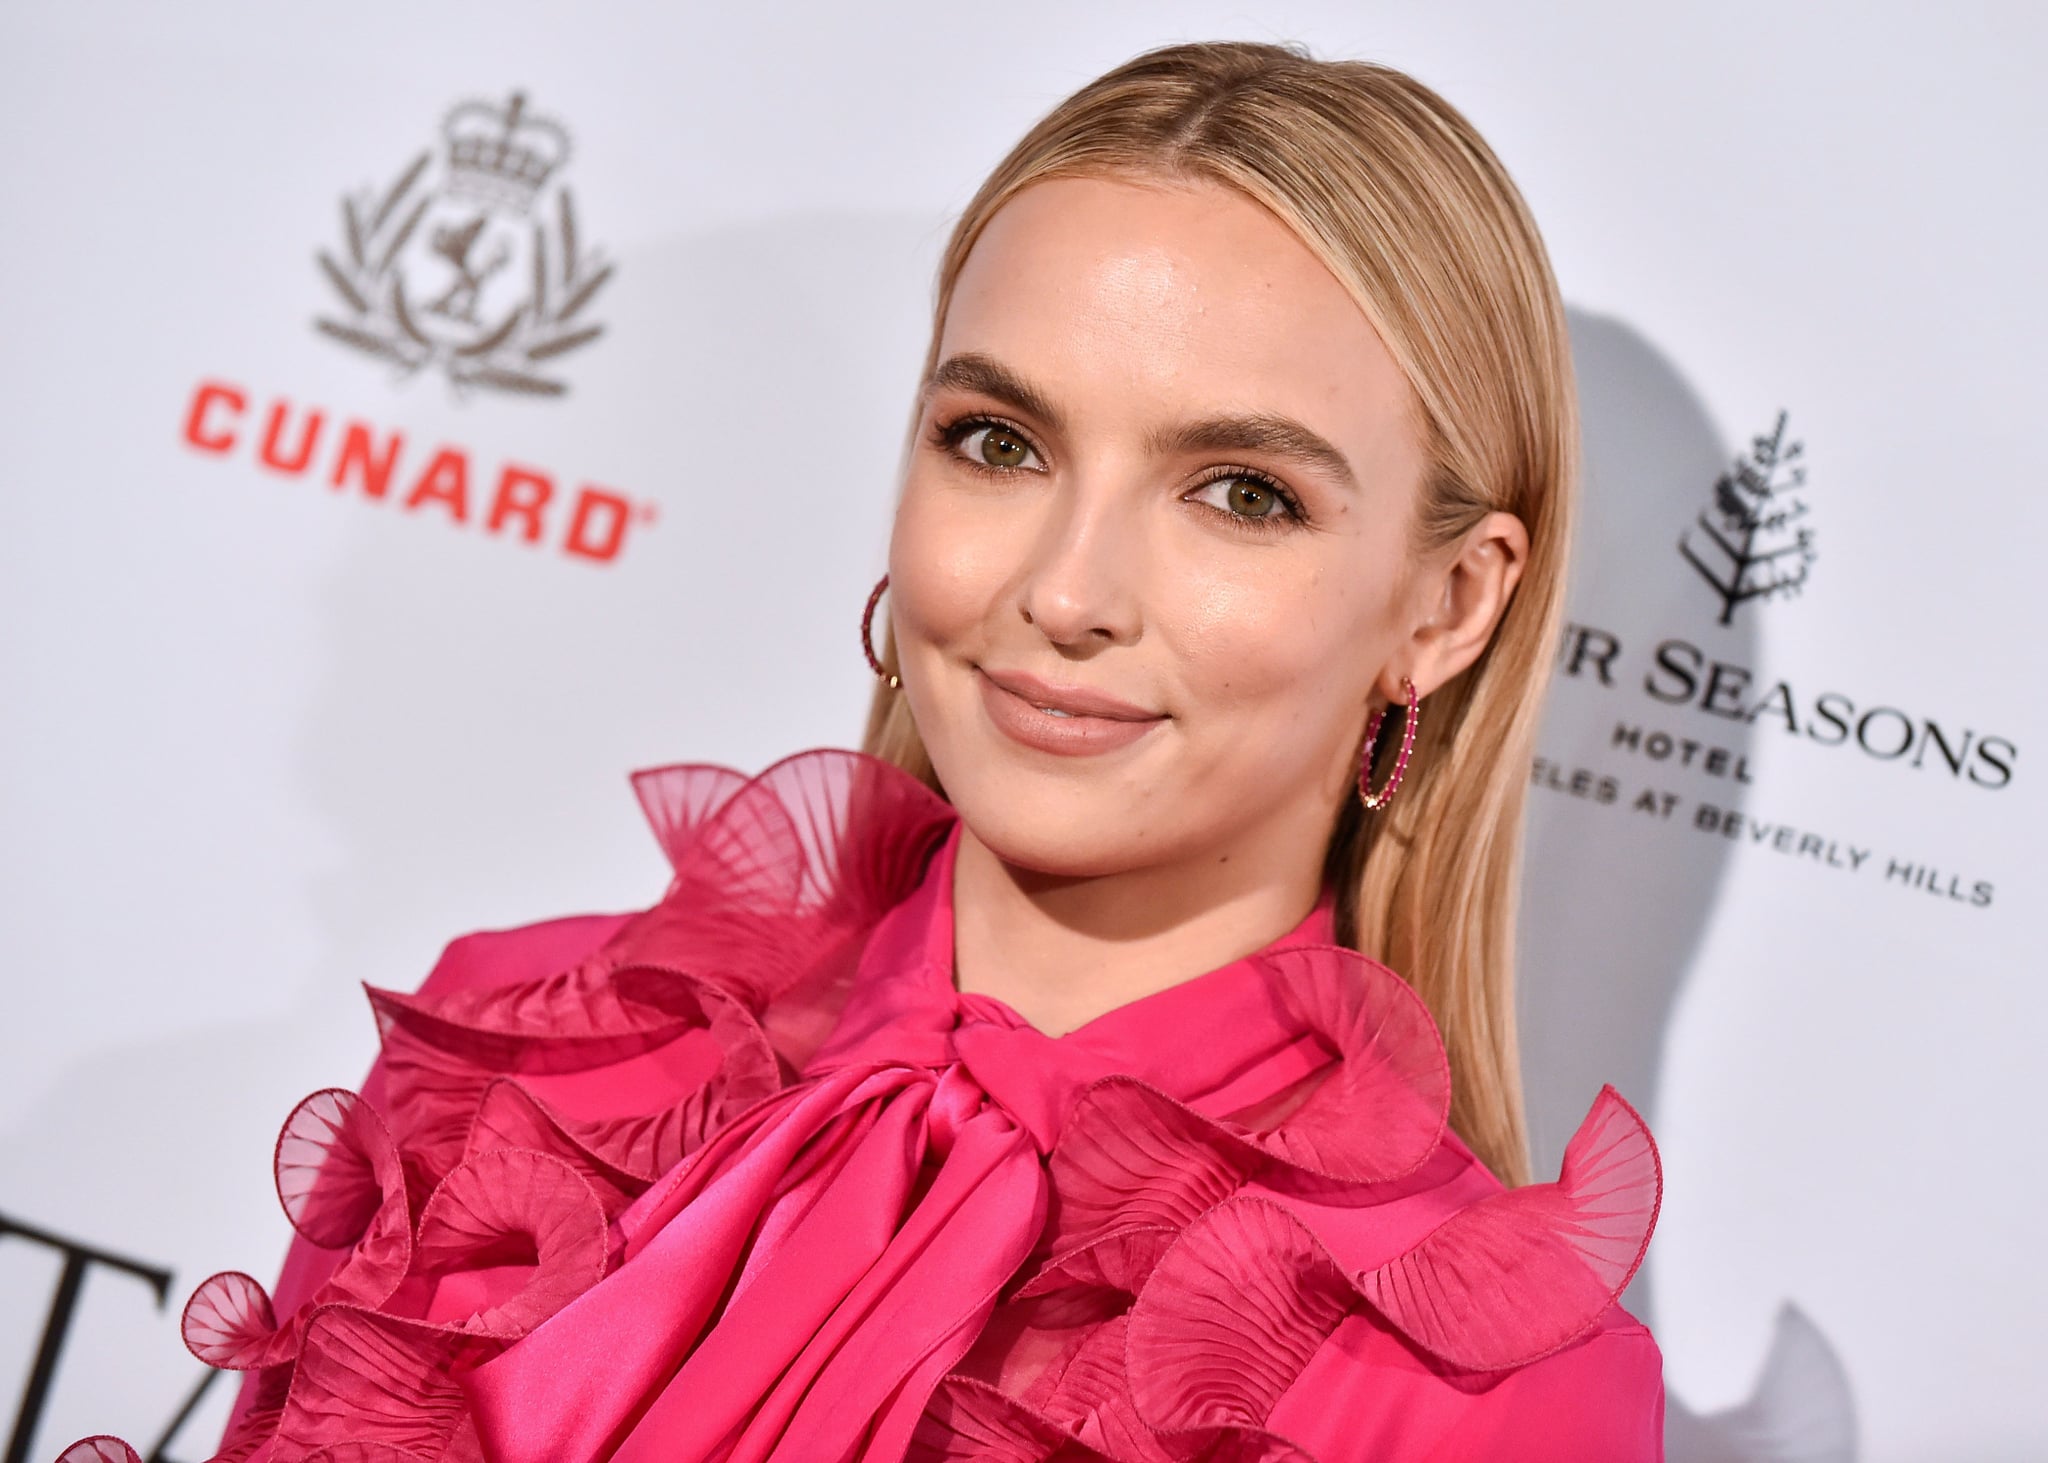 British actress Jodie Comer arrives for the BAFTA Tea Party at Four Seasons Hotel in Los Angeles, California, on January 4, 2020. (Photo by LISA O'CONNOR / AFP) (Photo by LISA O'CONNOR/AFP via Getty Images)